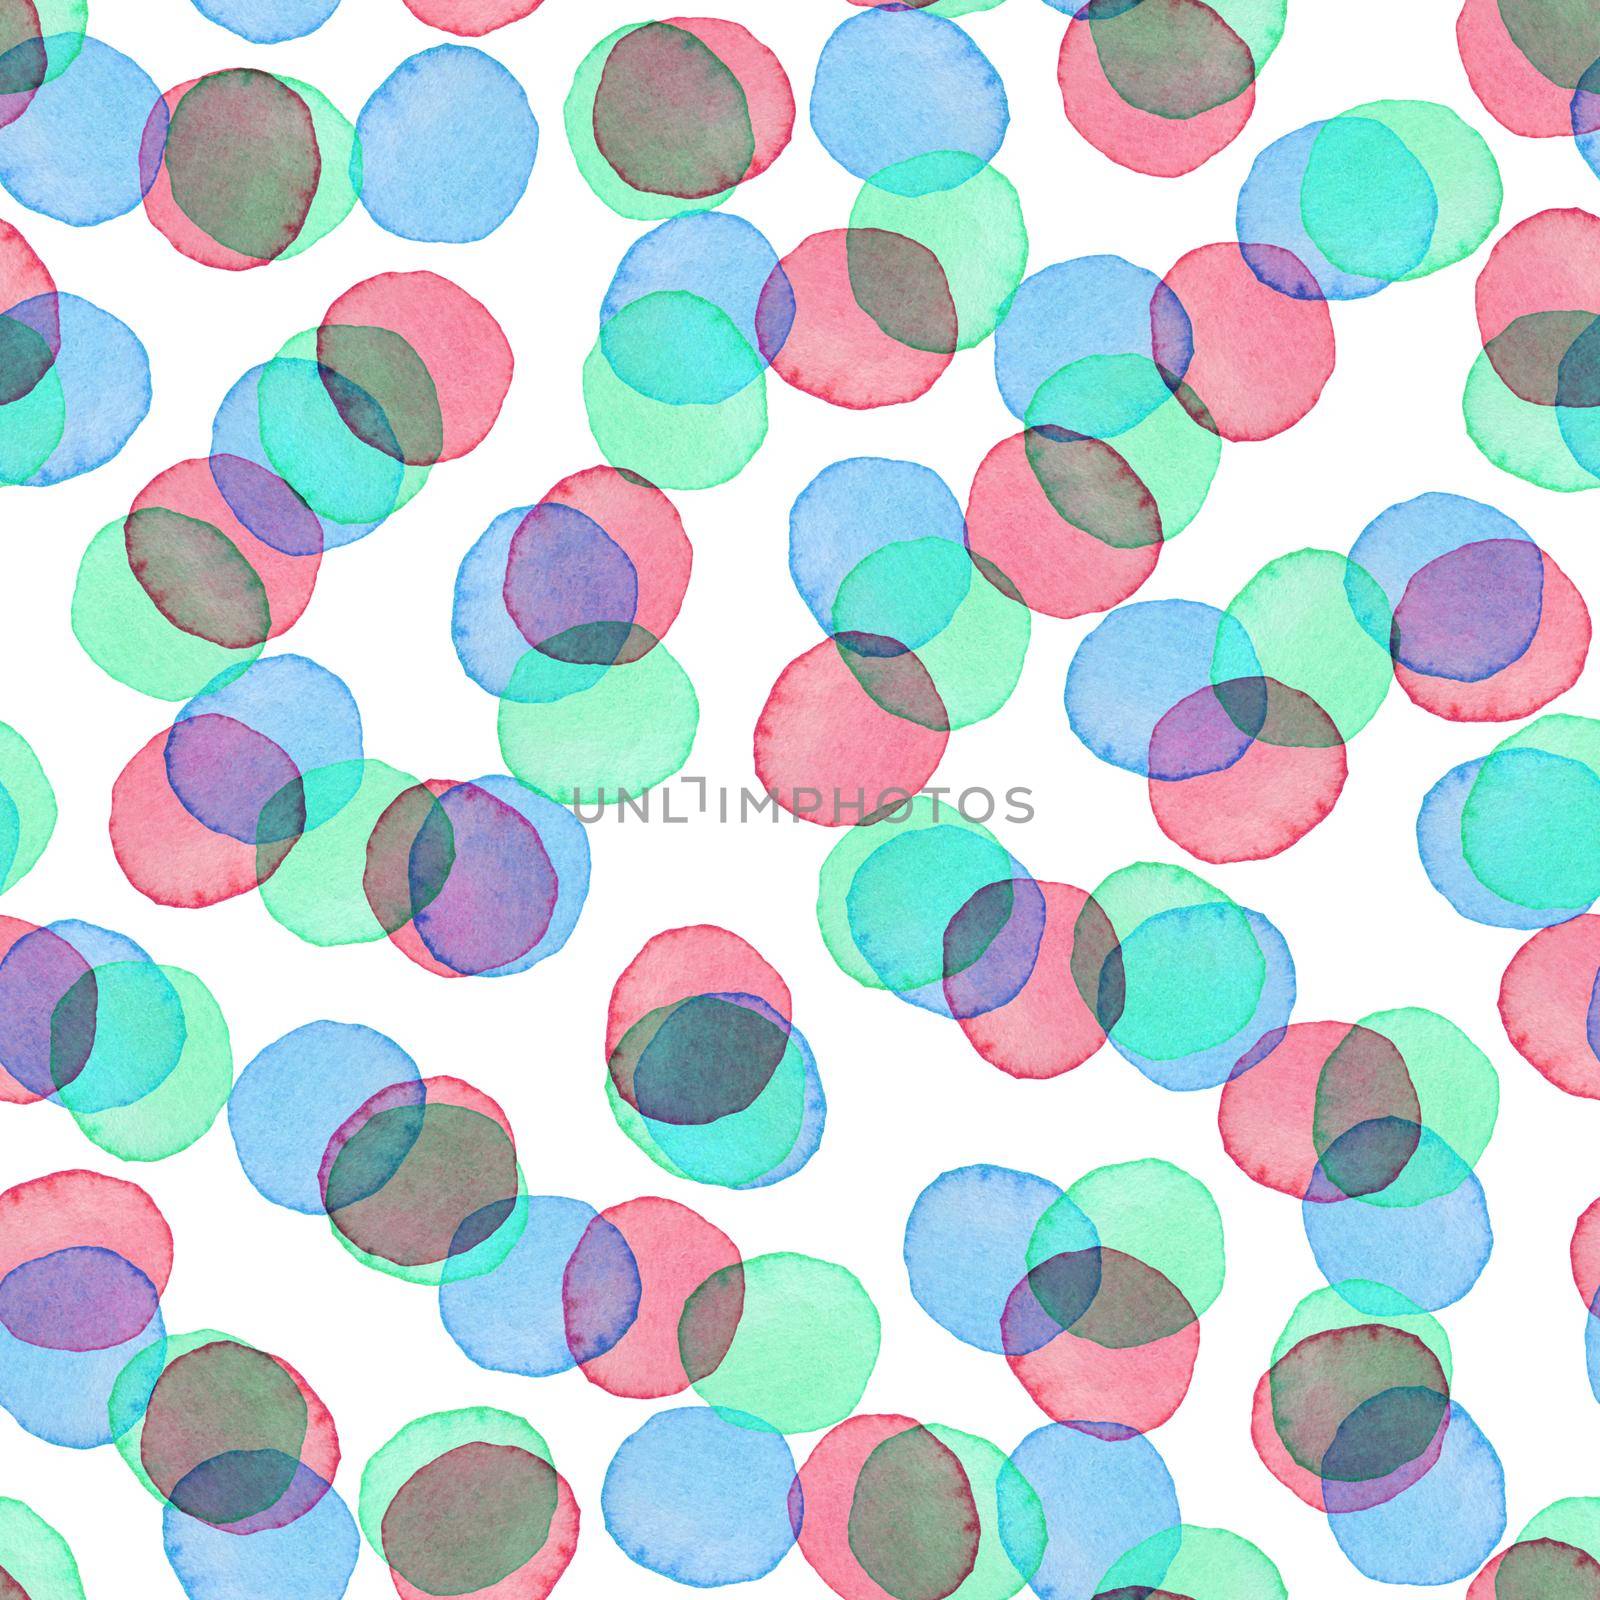 Hand Painted Brush Polka Dot Girly Seamless Watercolor Pattern. Abstract watercolour Round Circles in Purple Blue Color. Artistic Design for Fabric and Background by DesignAB